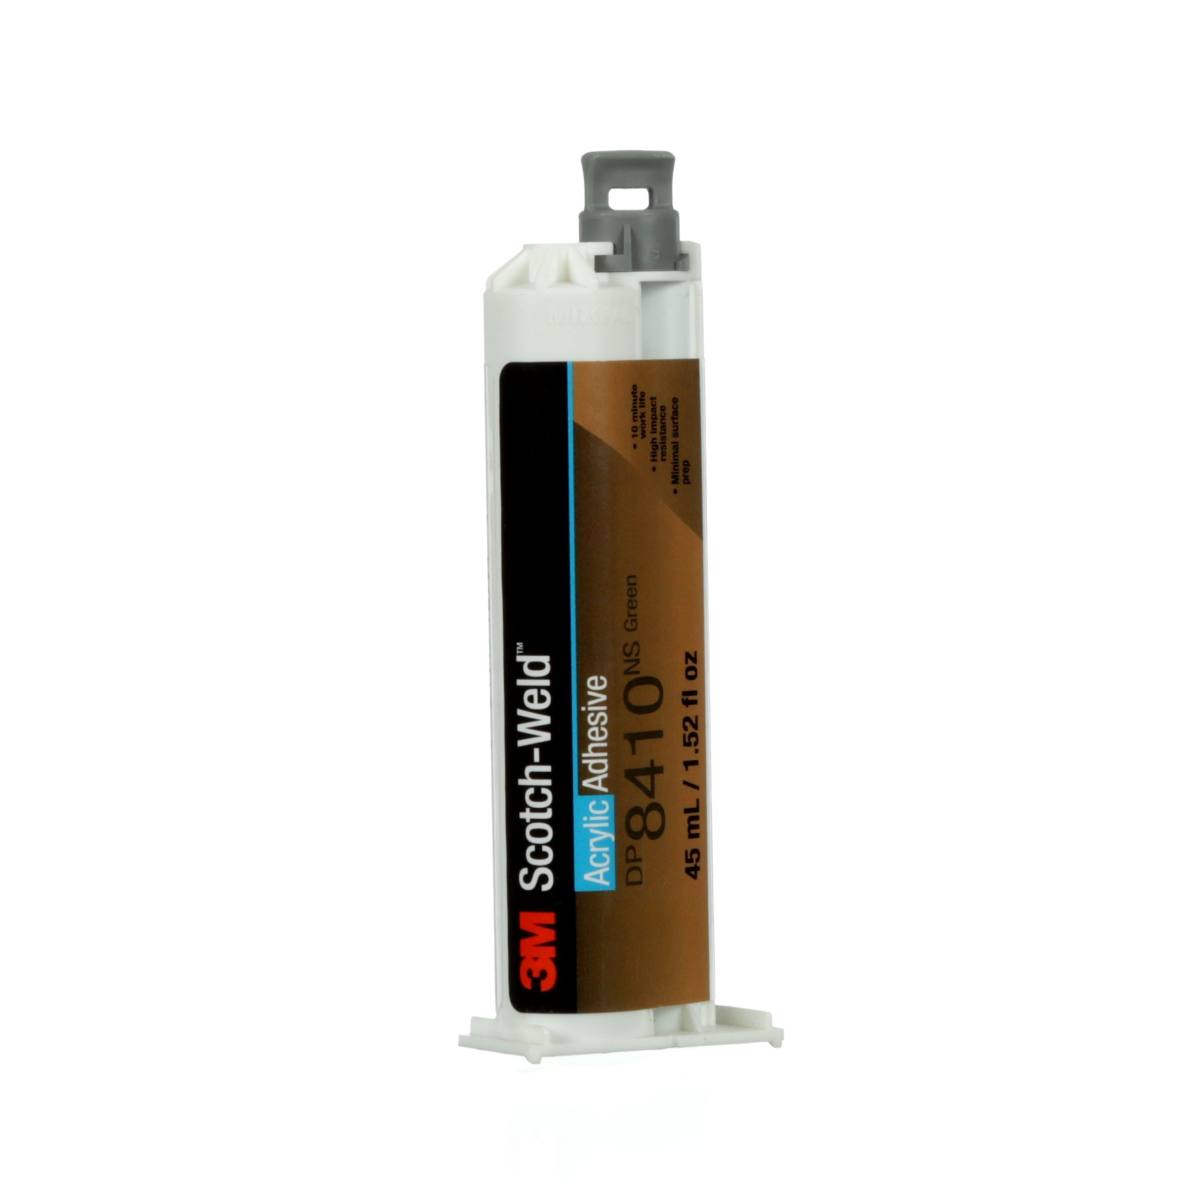 3M Scotch-Weld 2-component acrylate-based construction adhesive for the EPX System DP 8410 NS, green, 45 ml